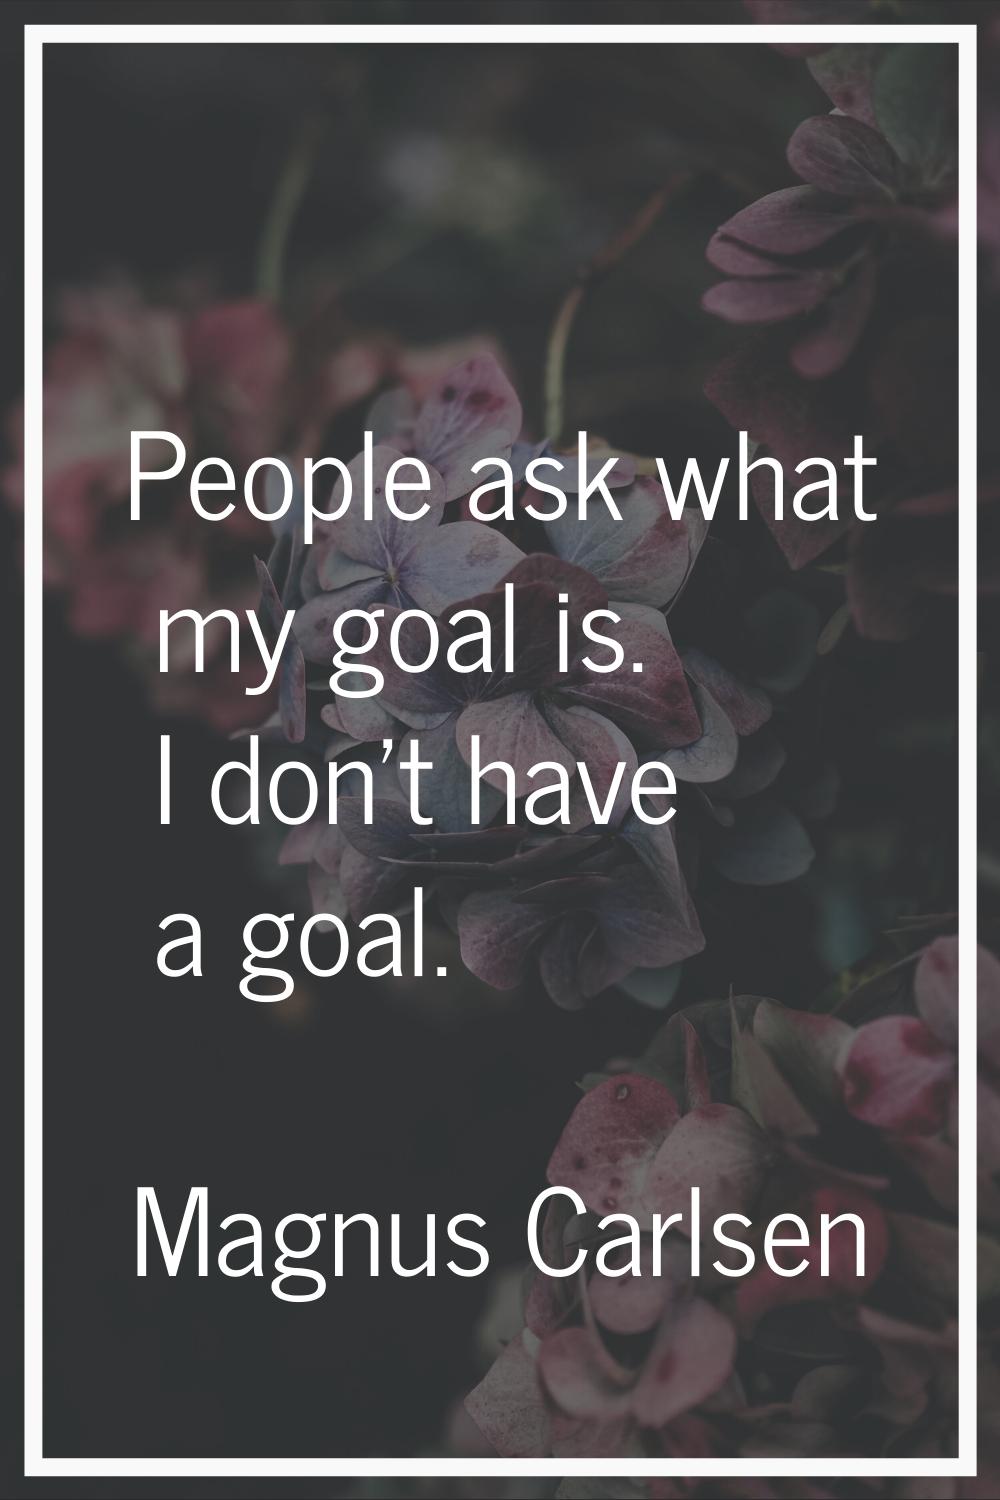 People ask what my goal is. I don't have a goal.